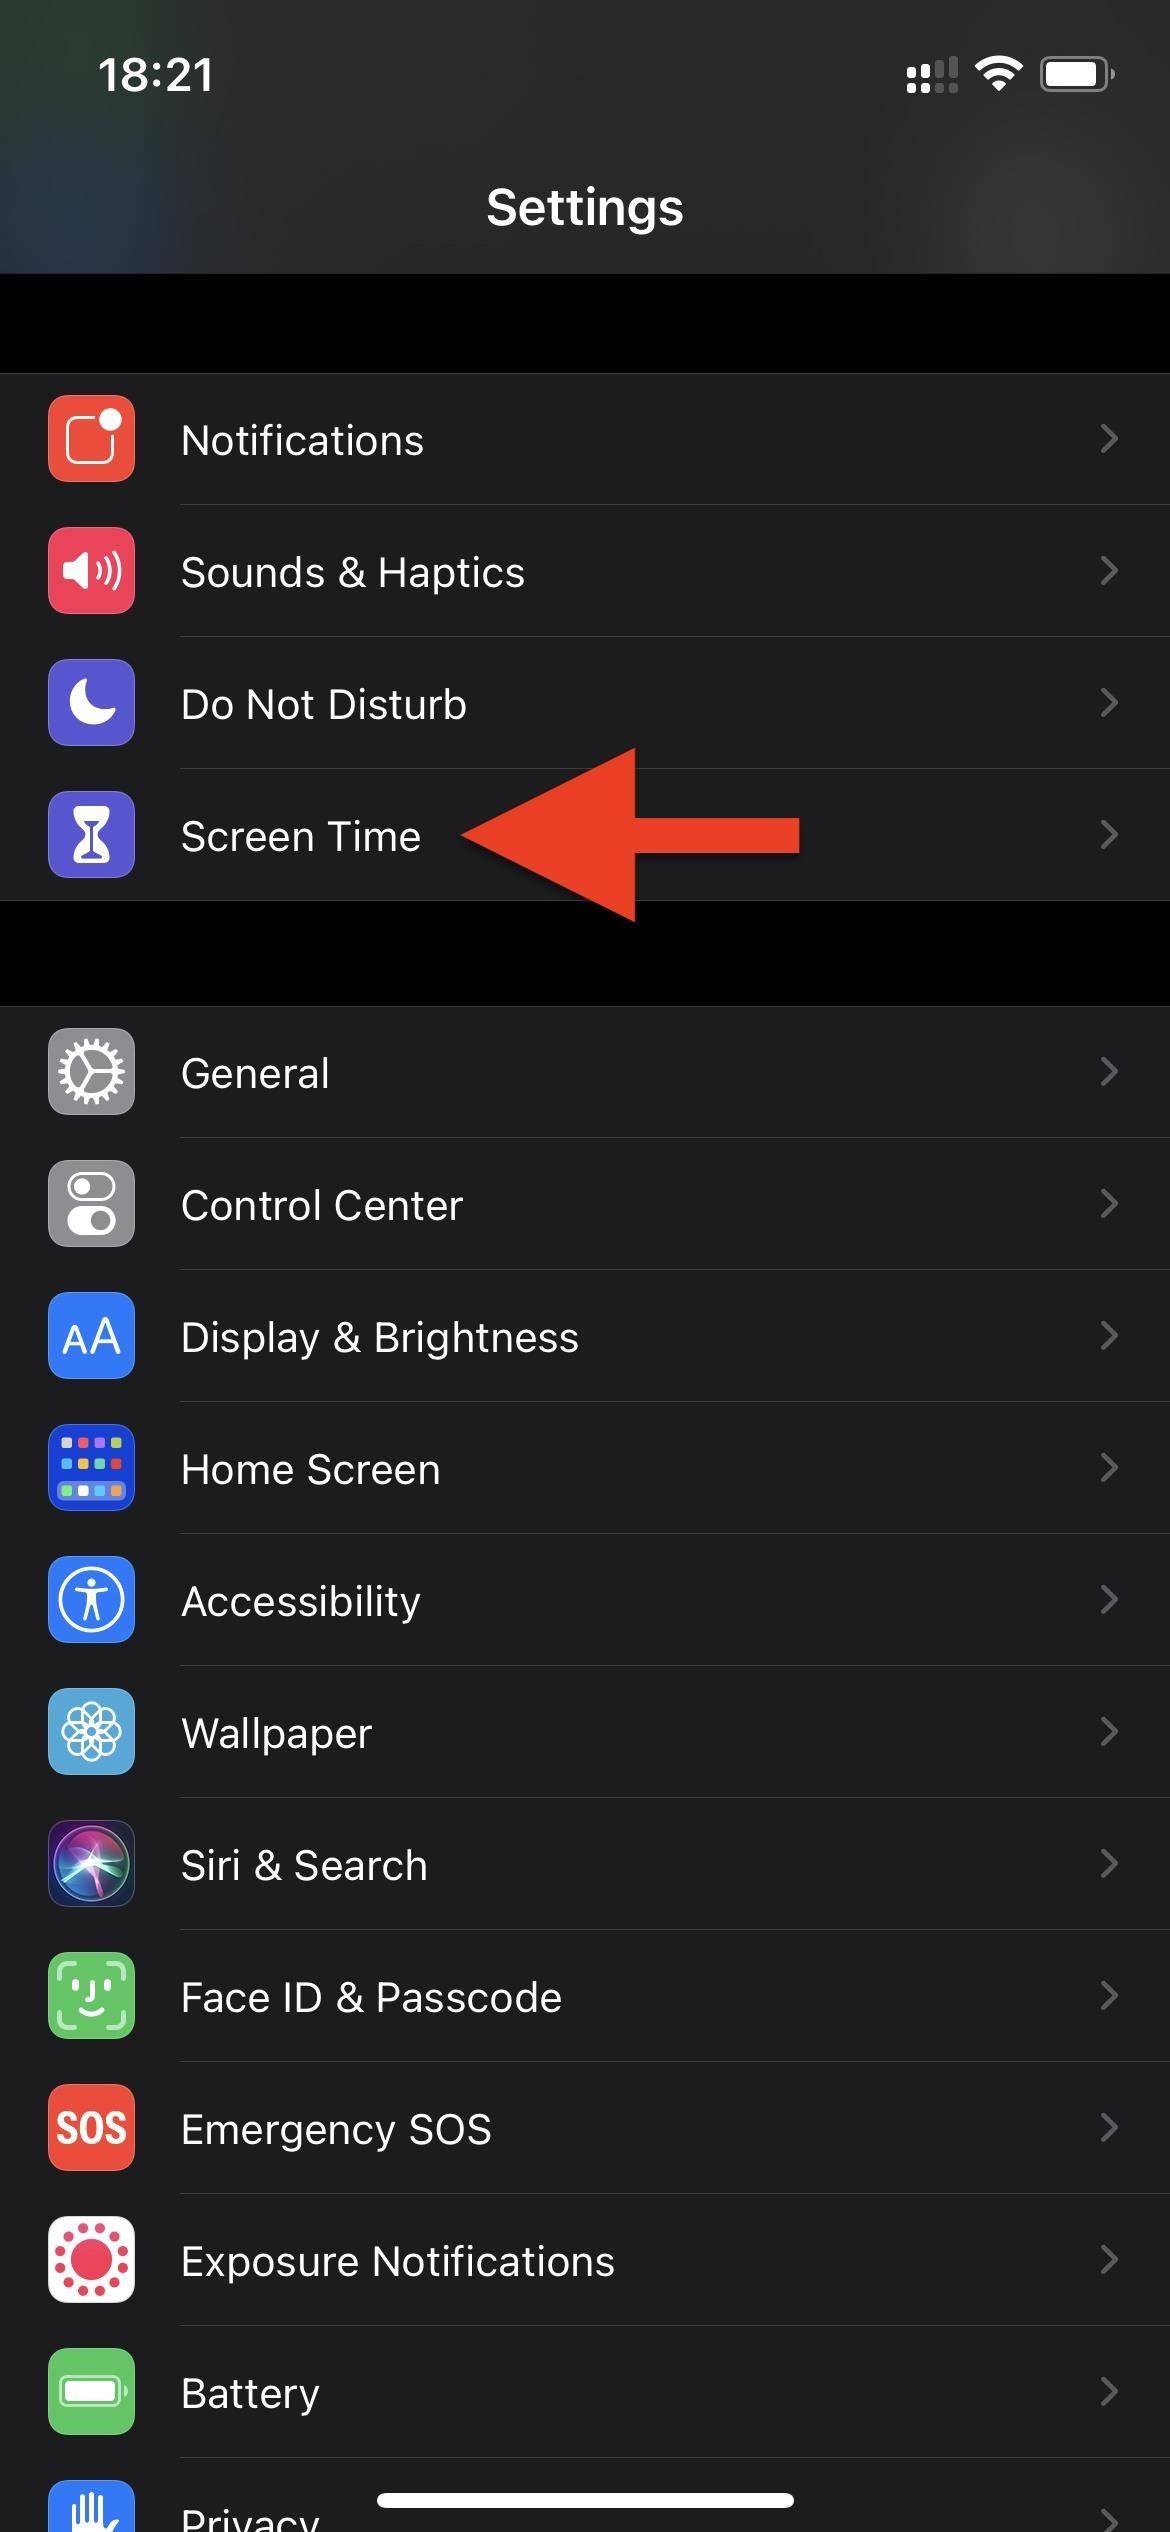 How to Block Shortcuts Notifications from Showing Up Every Time You Run an Automation on Your iPhone